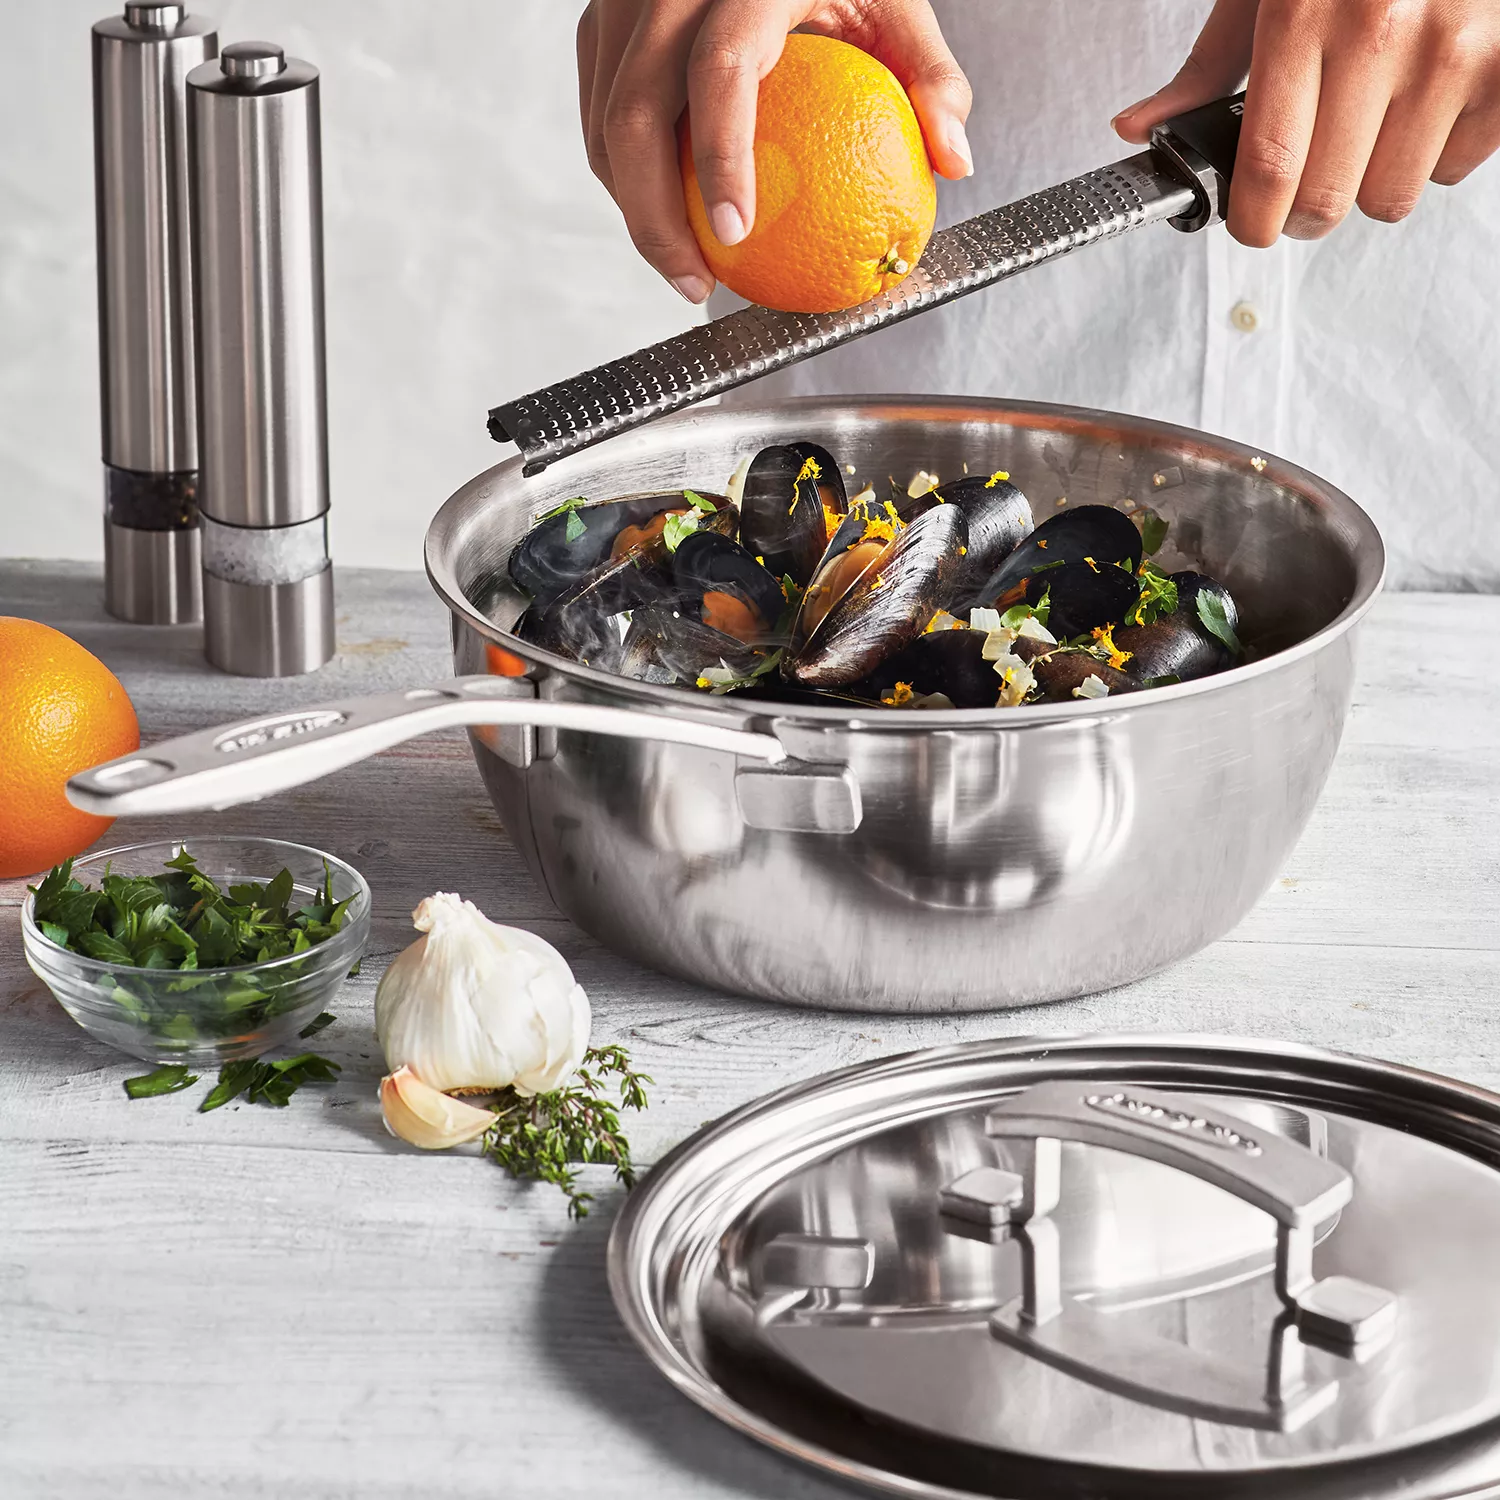 All-Clad d5 Stainless-Steel Essential Pan